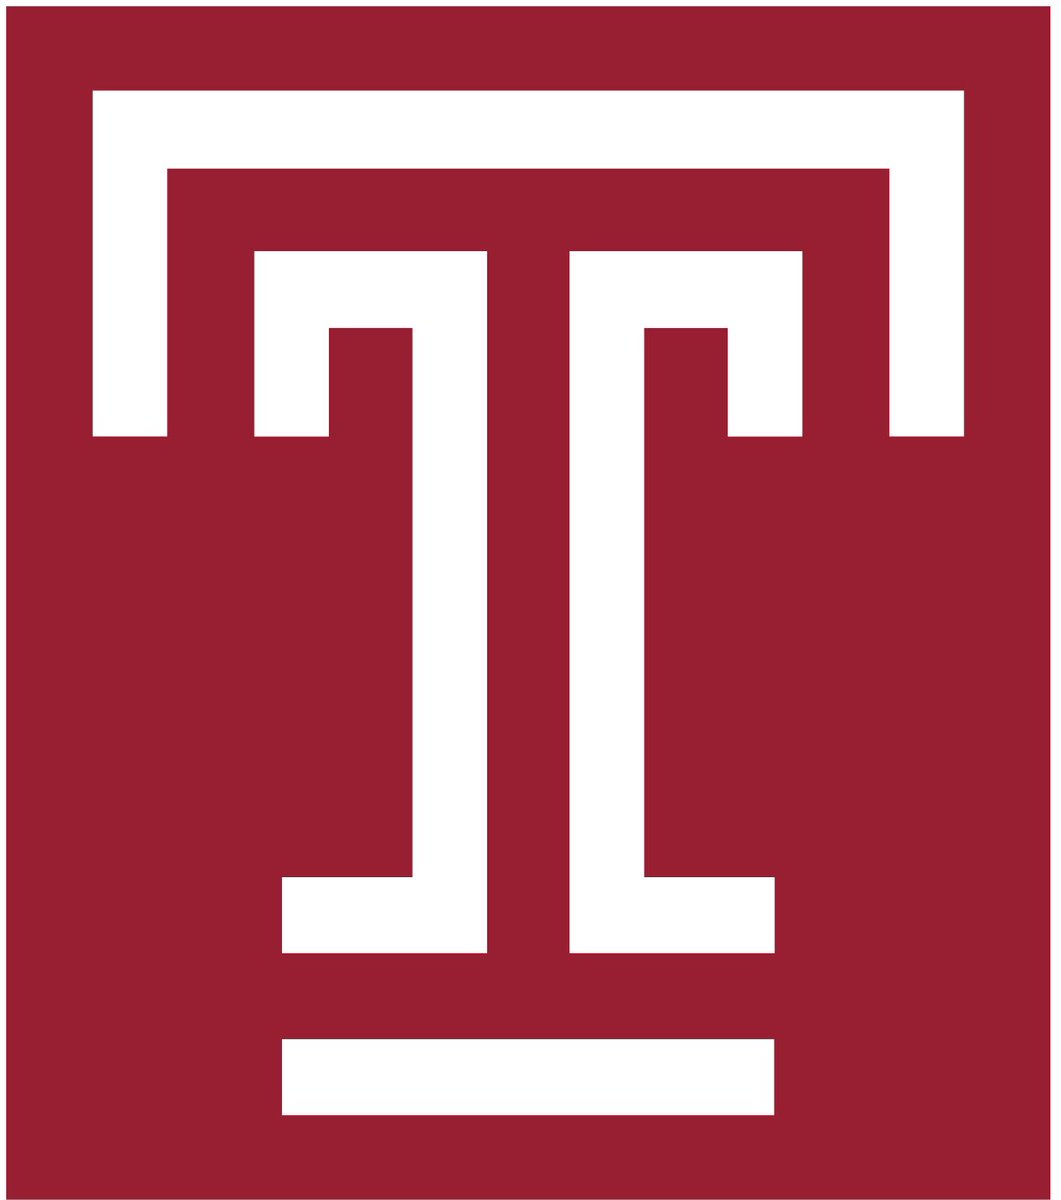 Blessed to receive my 4th offer from temple university @CoachWiesehan @_CoachCarroll_ @BigCountyPreps1